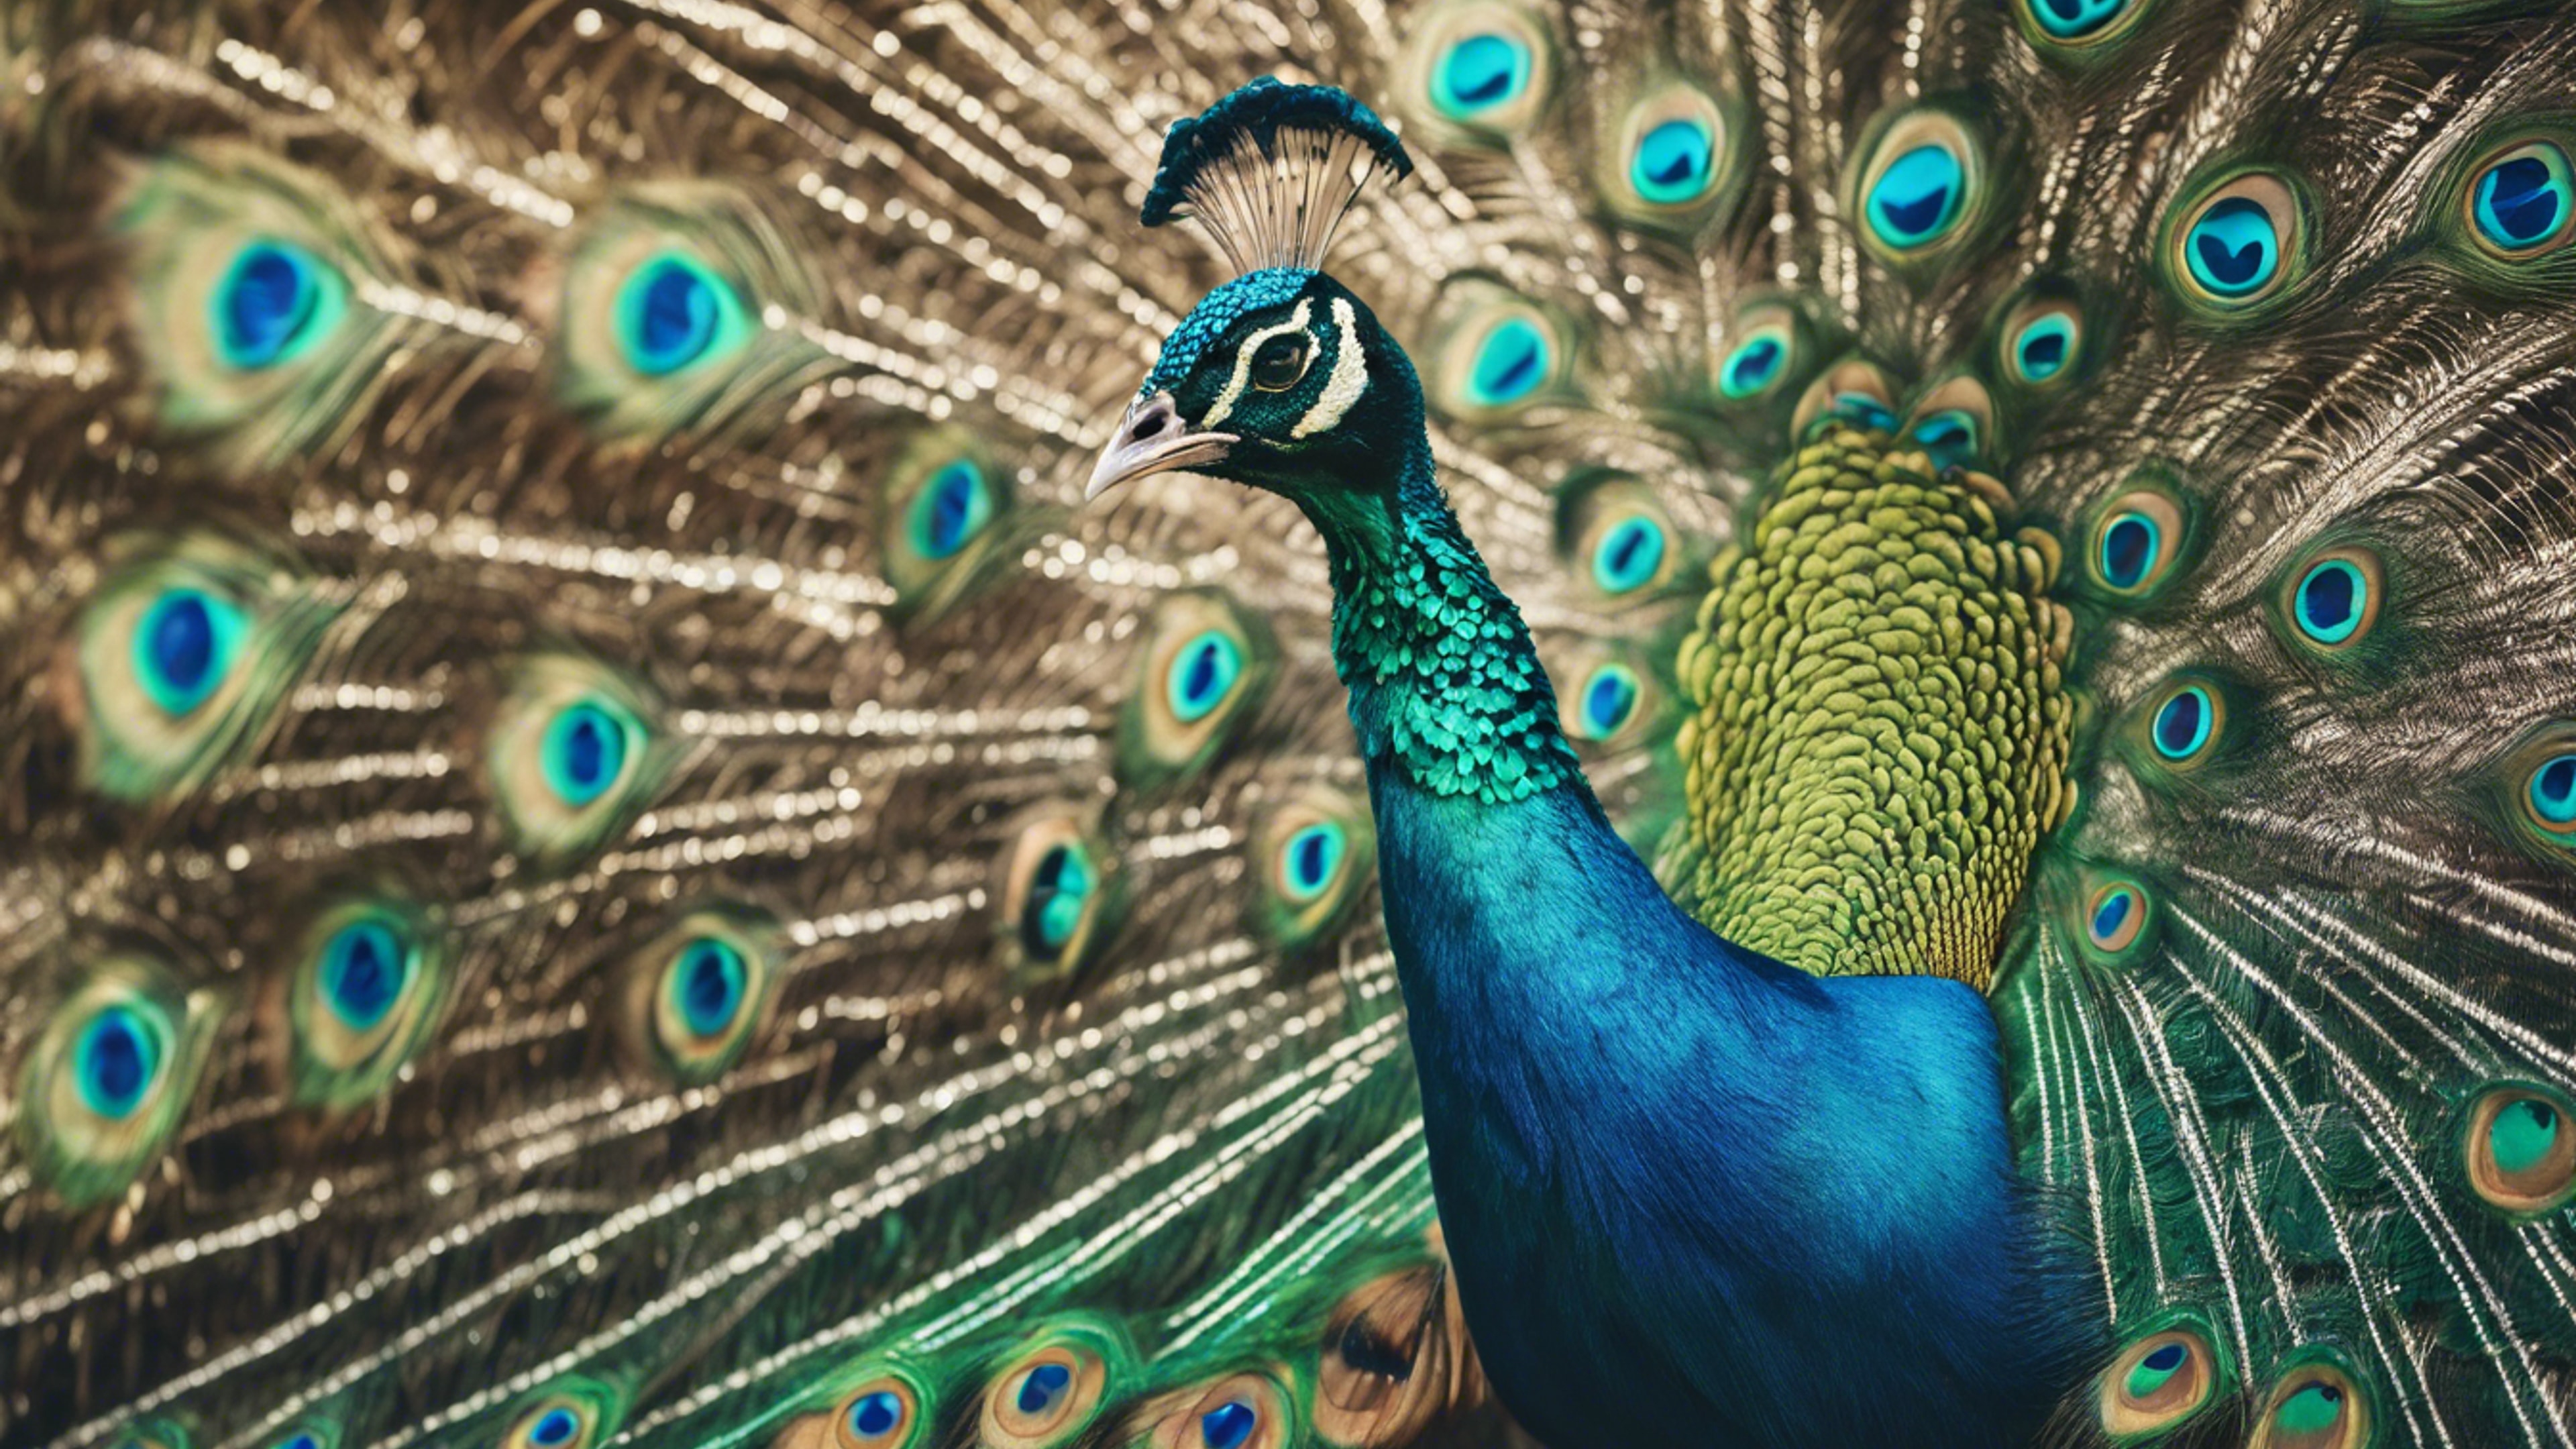 A proudly standing peacock showing off its cool teal plumage. טפט[c03cd8acf17648f0a47e]